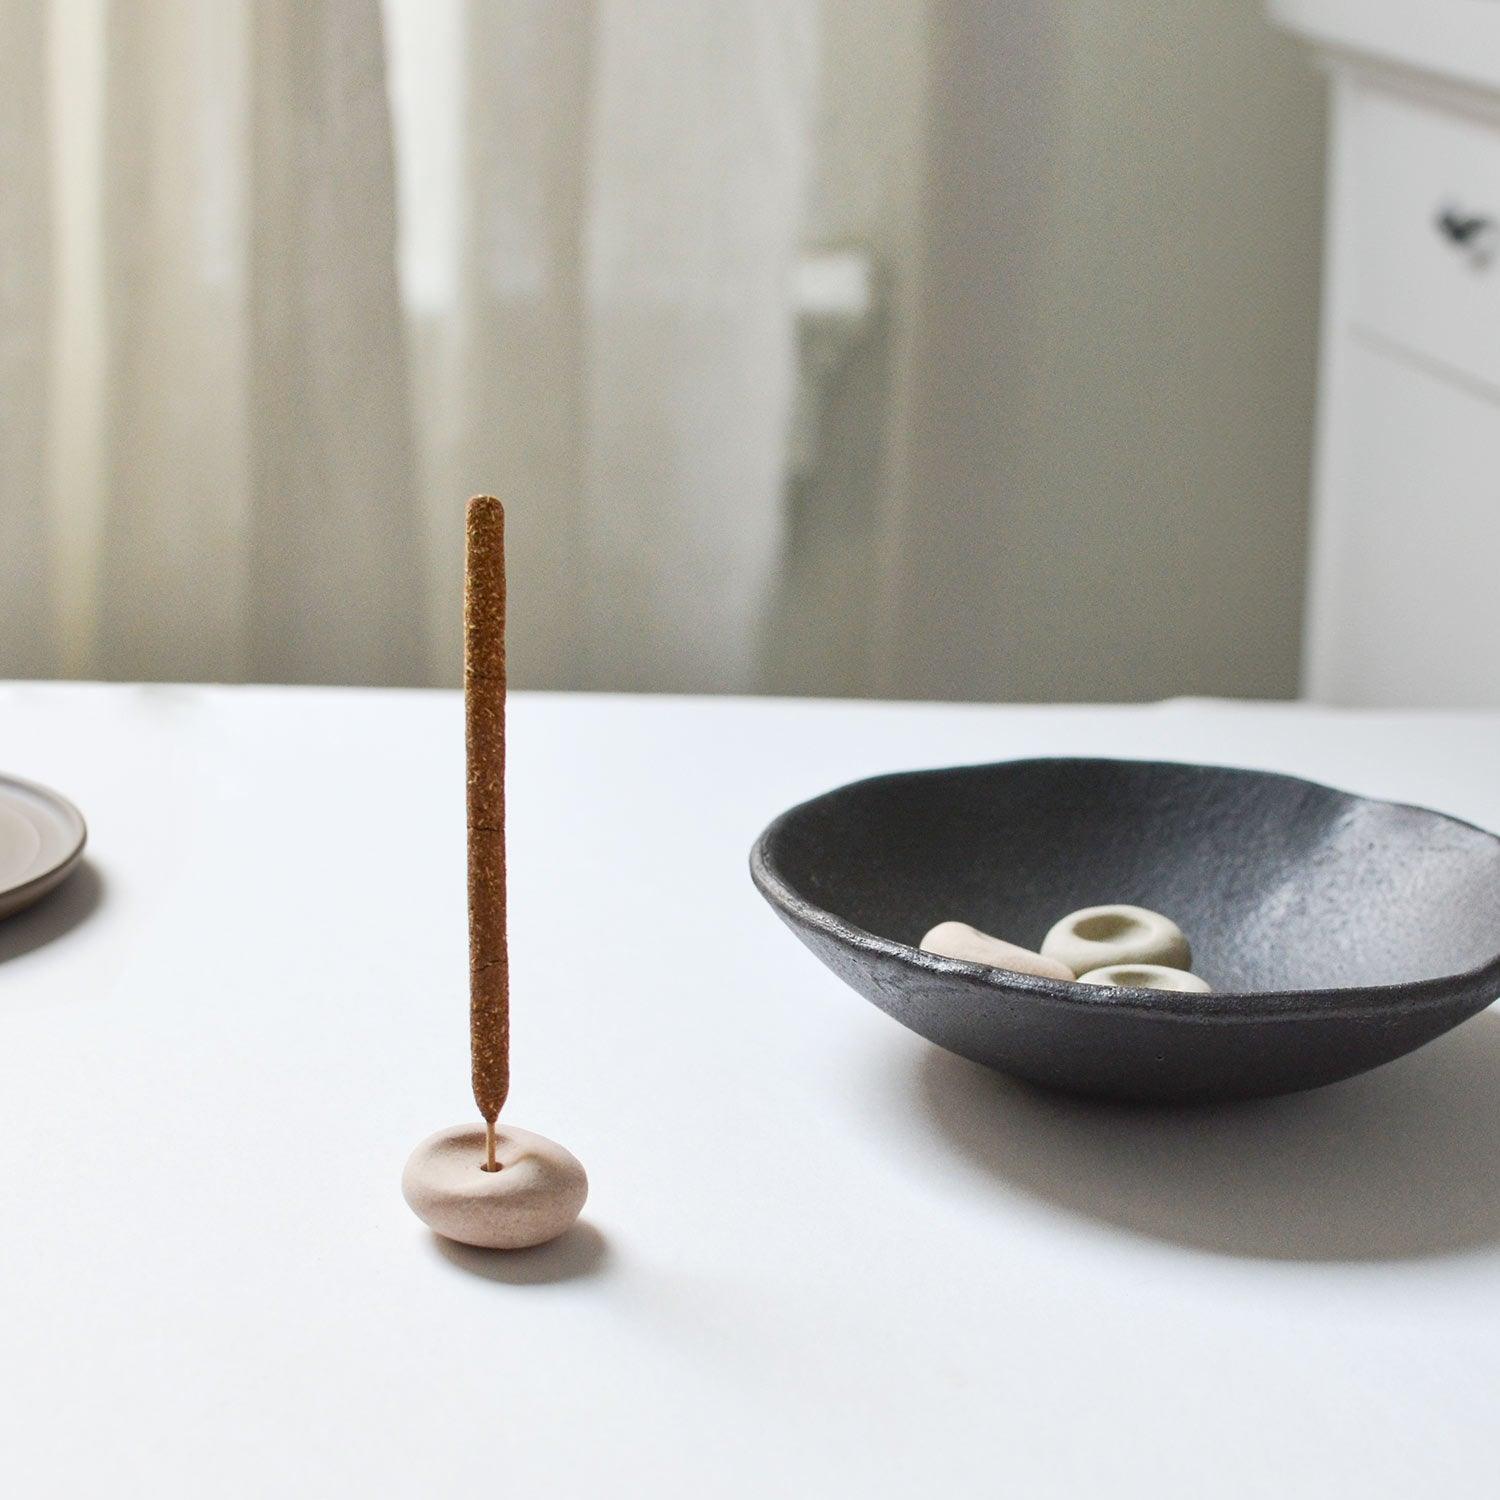 Left: incense stick and mini pebble-shaped incense holder, Right: 3 mini pebble-shaped incense holder on the incense bowl